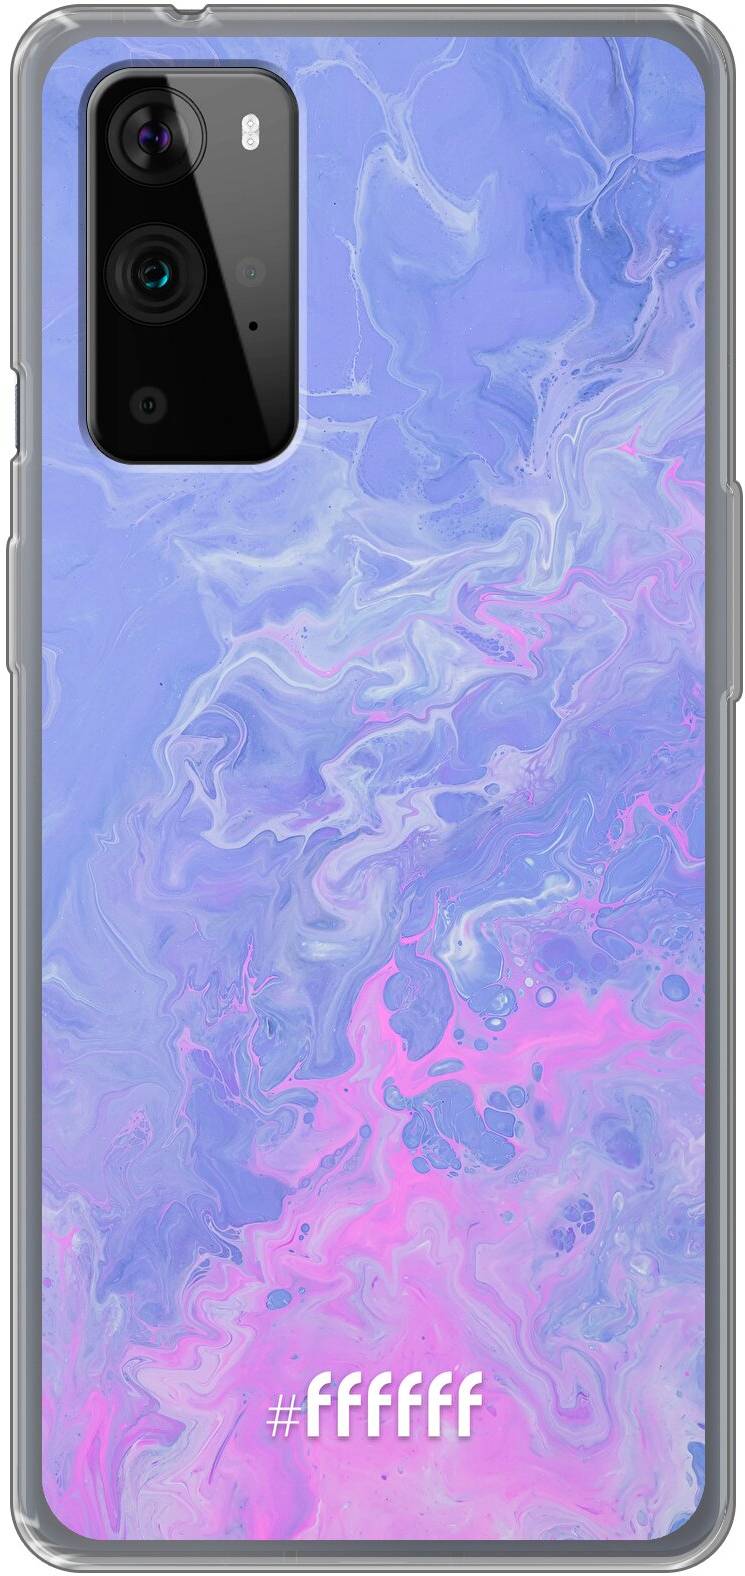 Purple and Pink Water 9 Pro